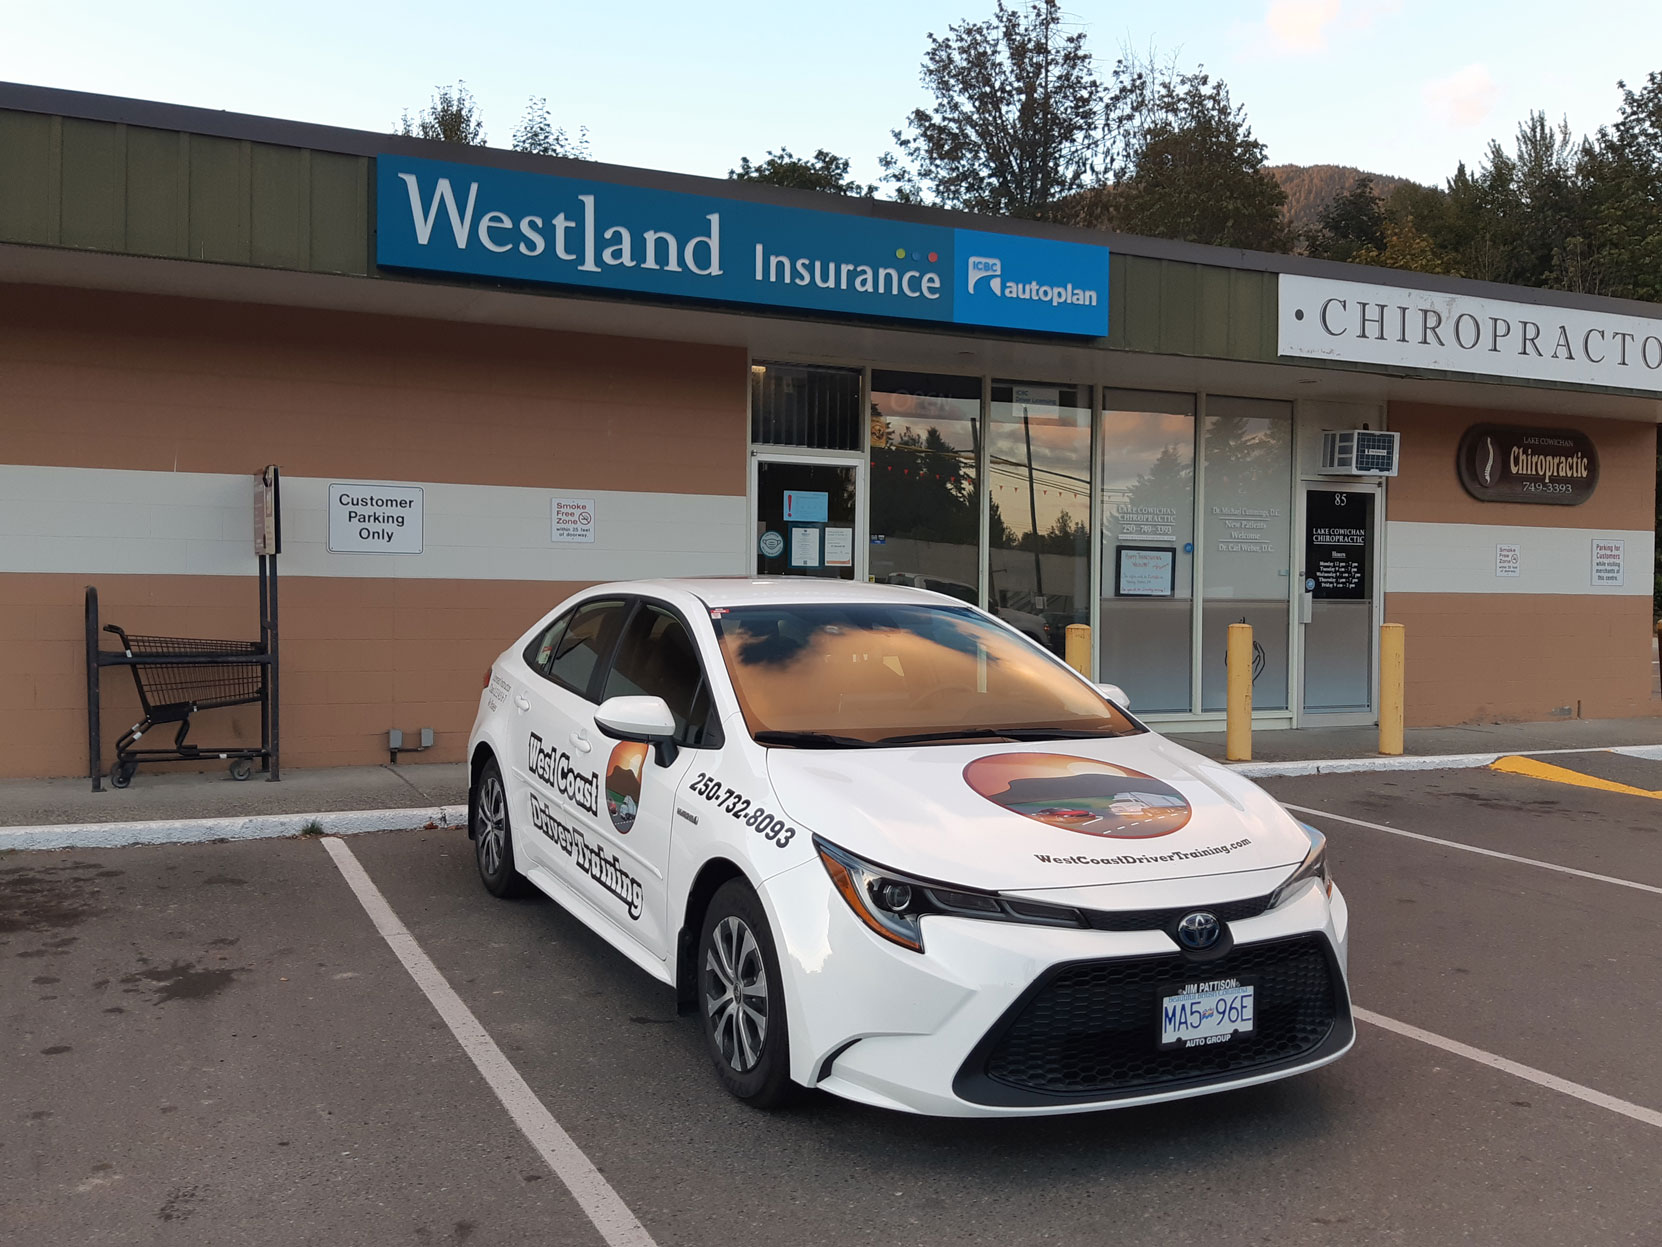 You can write the Air Brakes written test at Westland Insurance, 87 Darnell Road, Lake Cowichan B.C. [Photo: West Coast Driver Training]